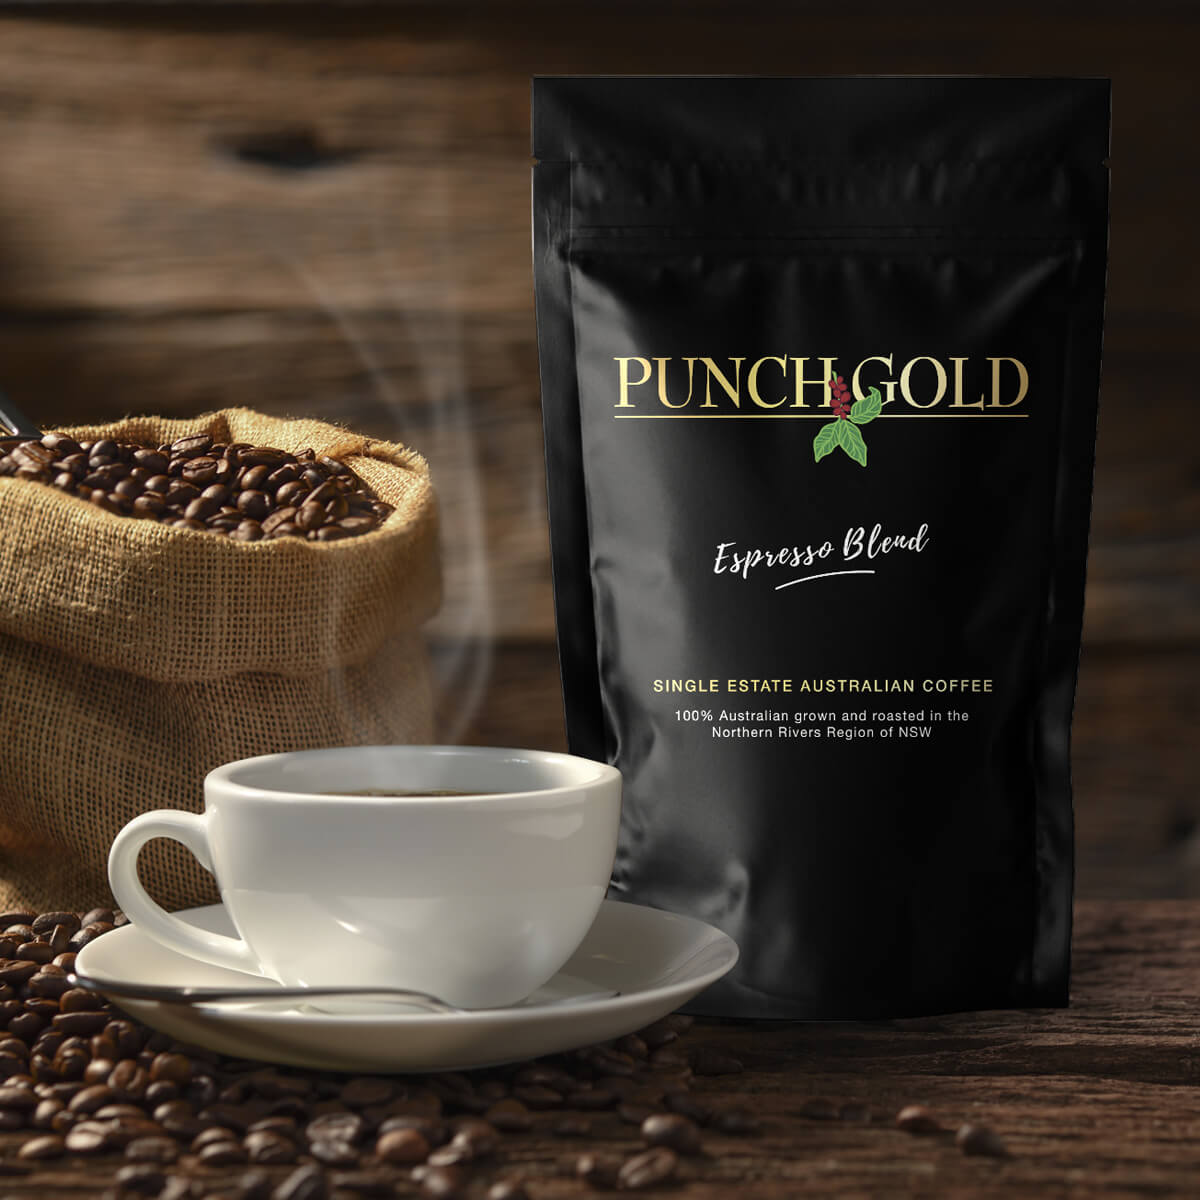 Punch Gold Coffee bag with coffee cup